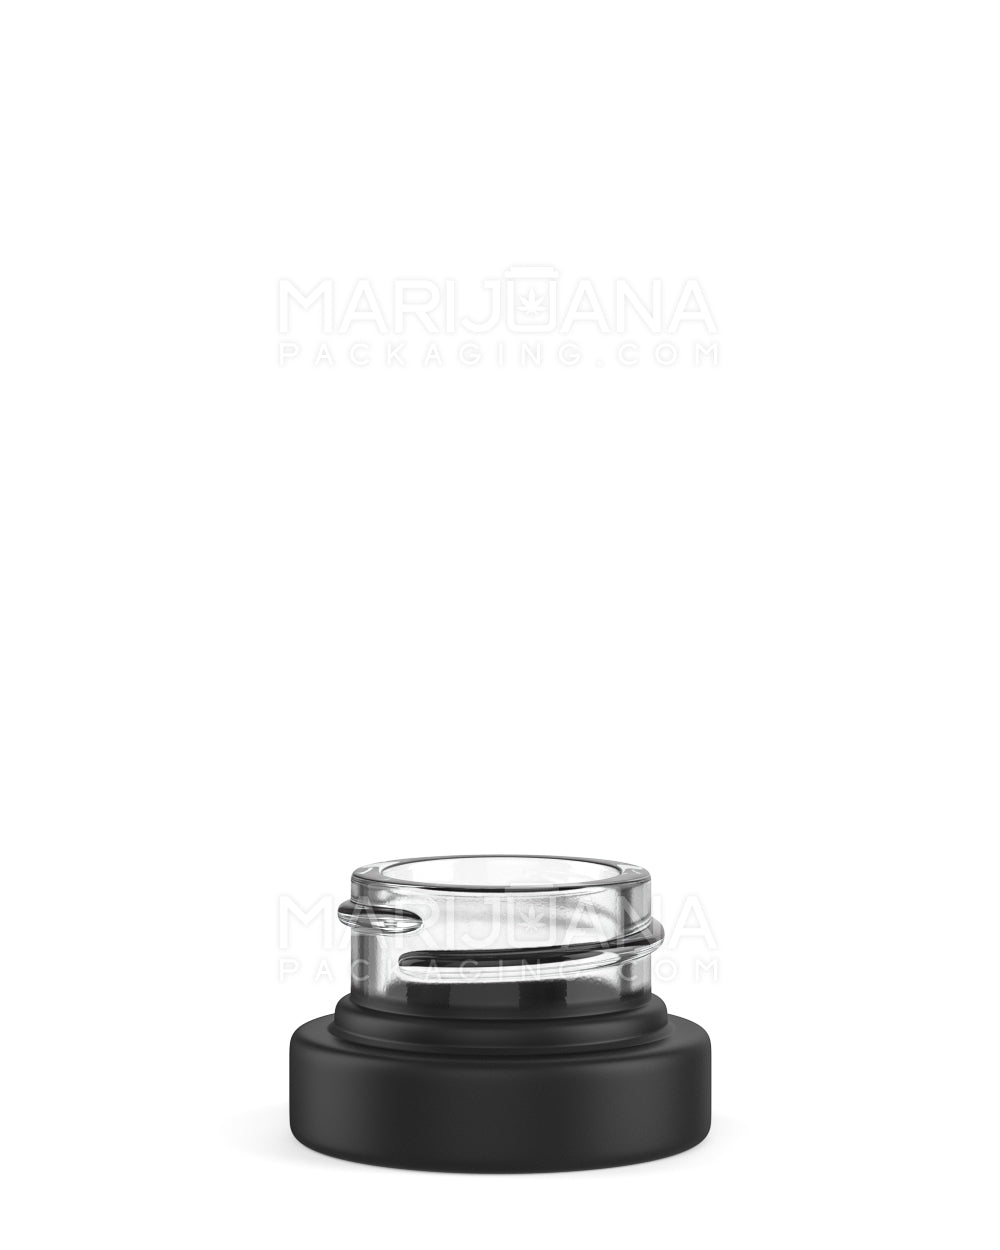 Matte Black Glass Concentrate Containers | 28mm - 5mL - 504 Count - 1